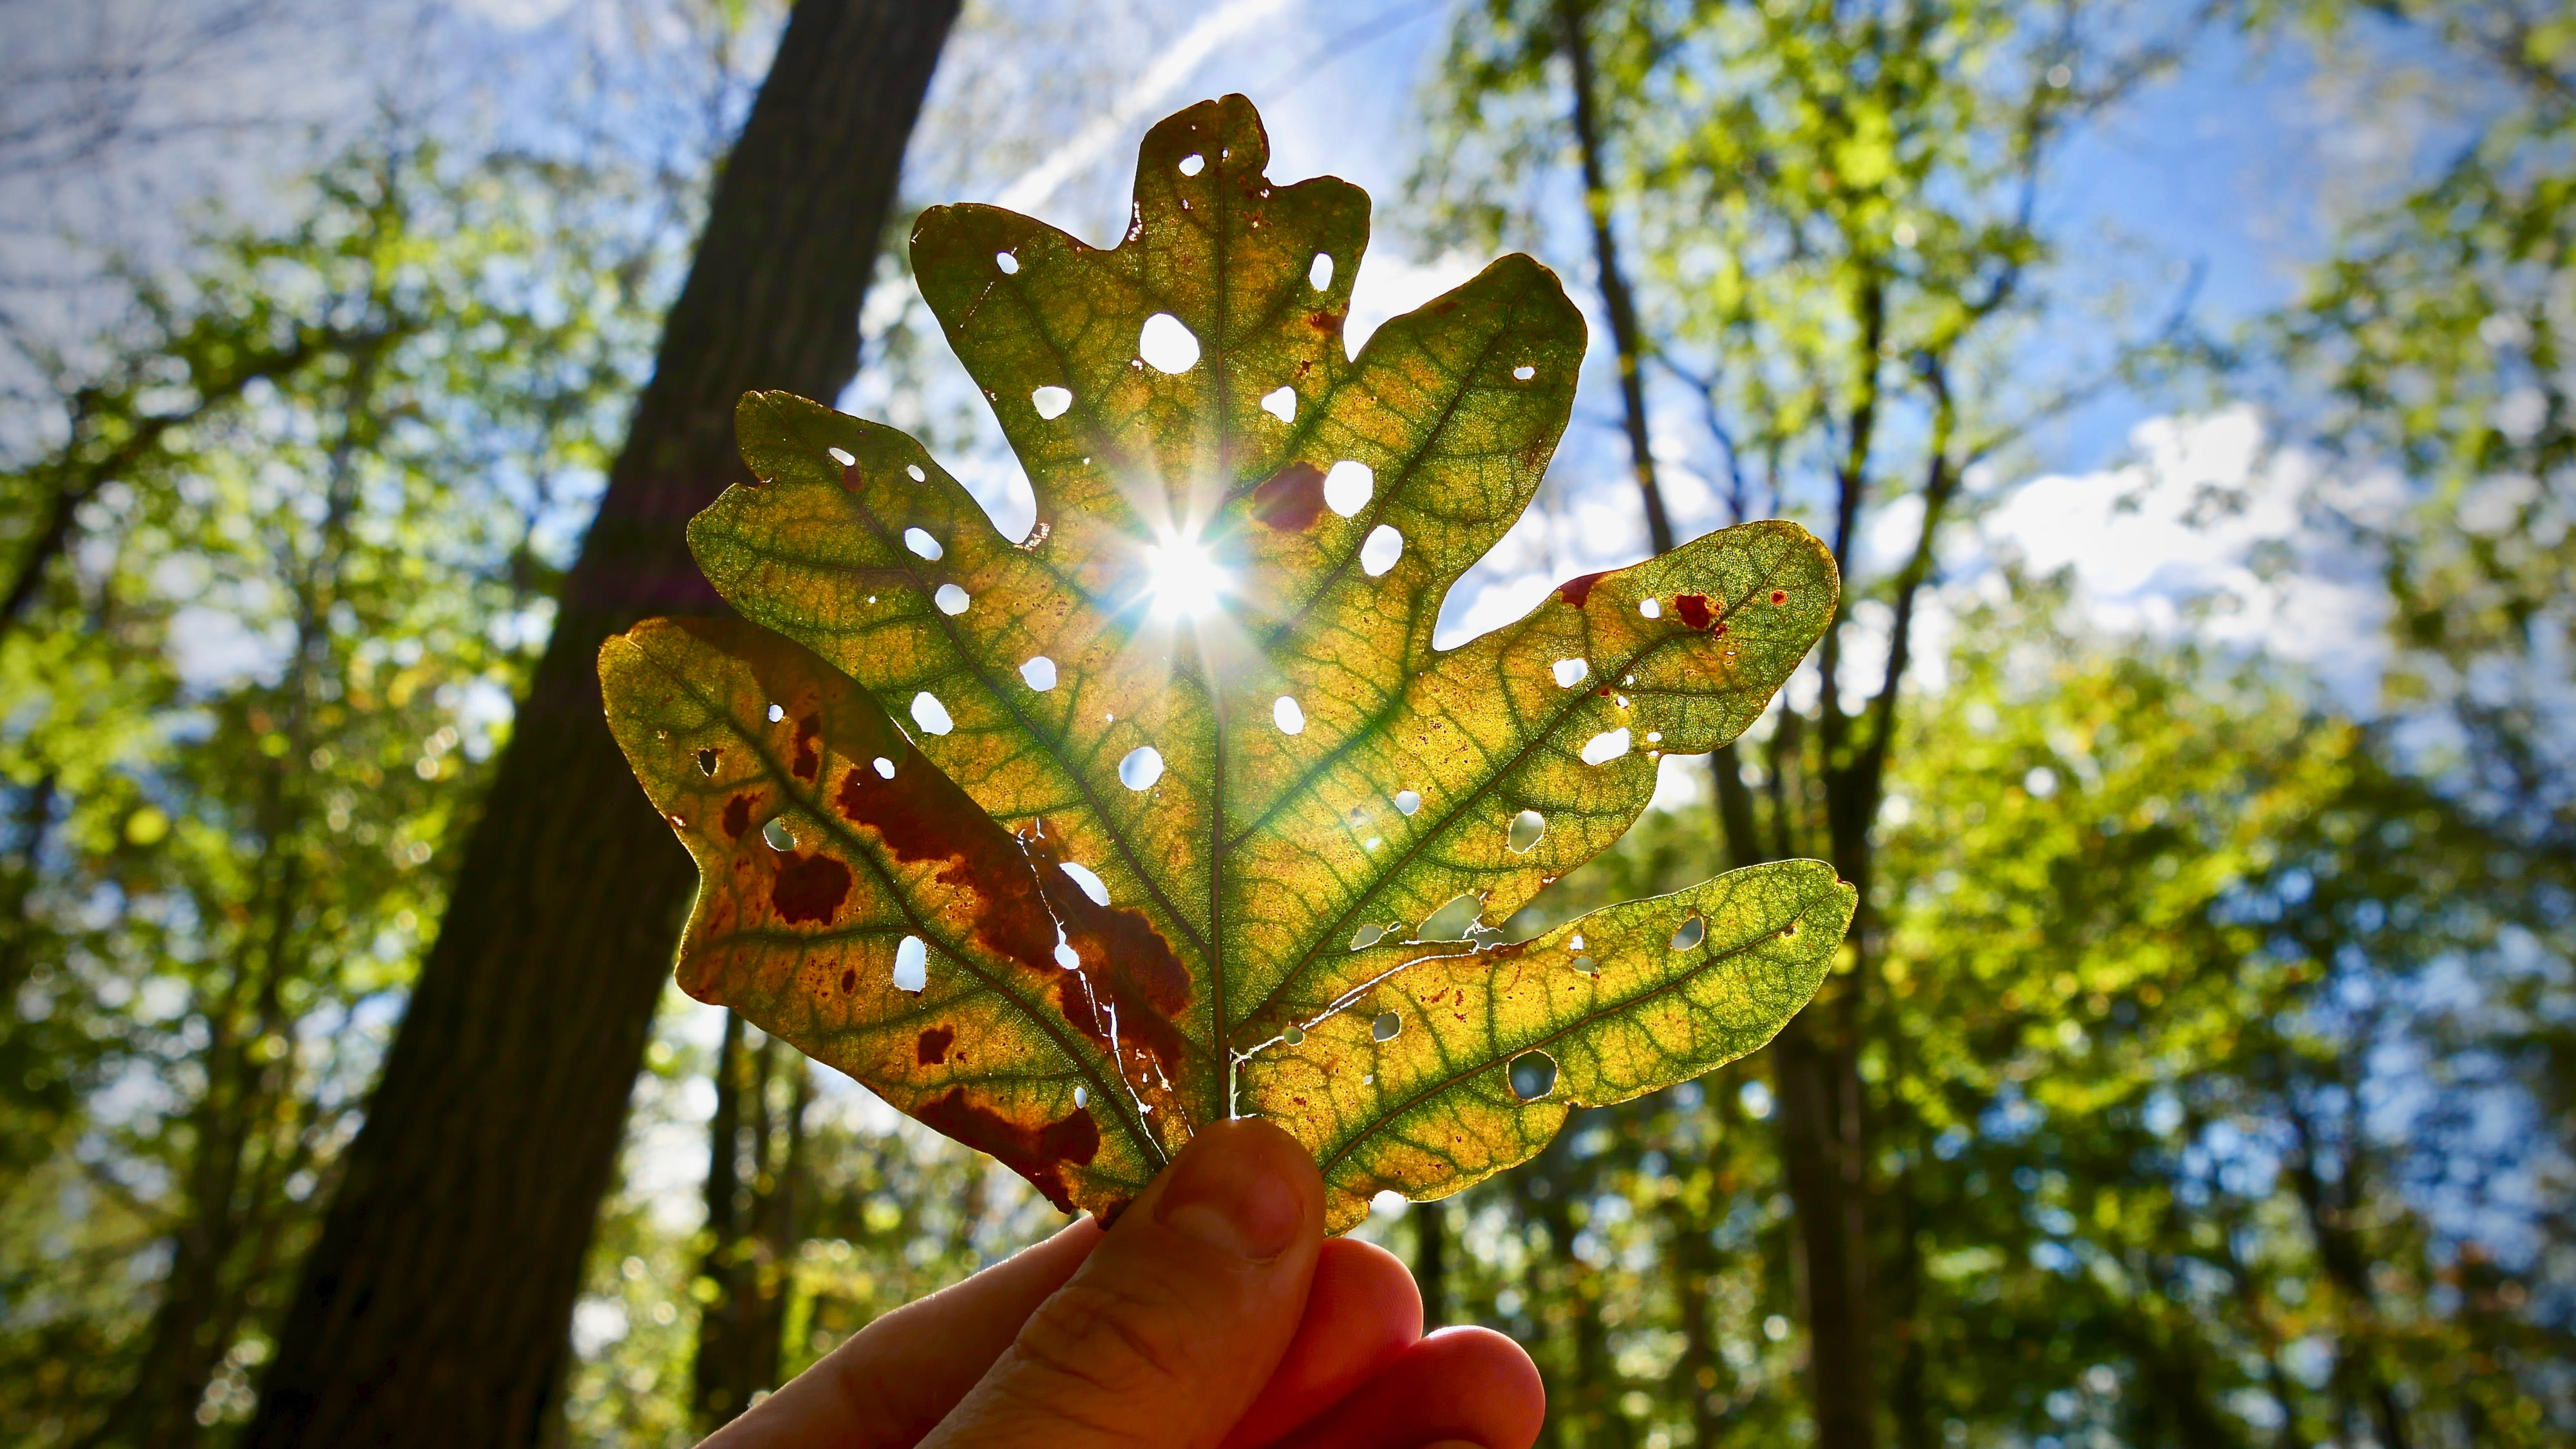 A hand holds up a leaf against the sky. Sunlight flares through the small round holes that insects have eaten into the leaf.